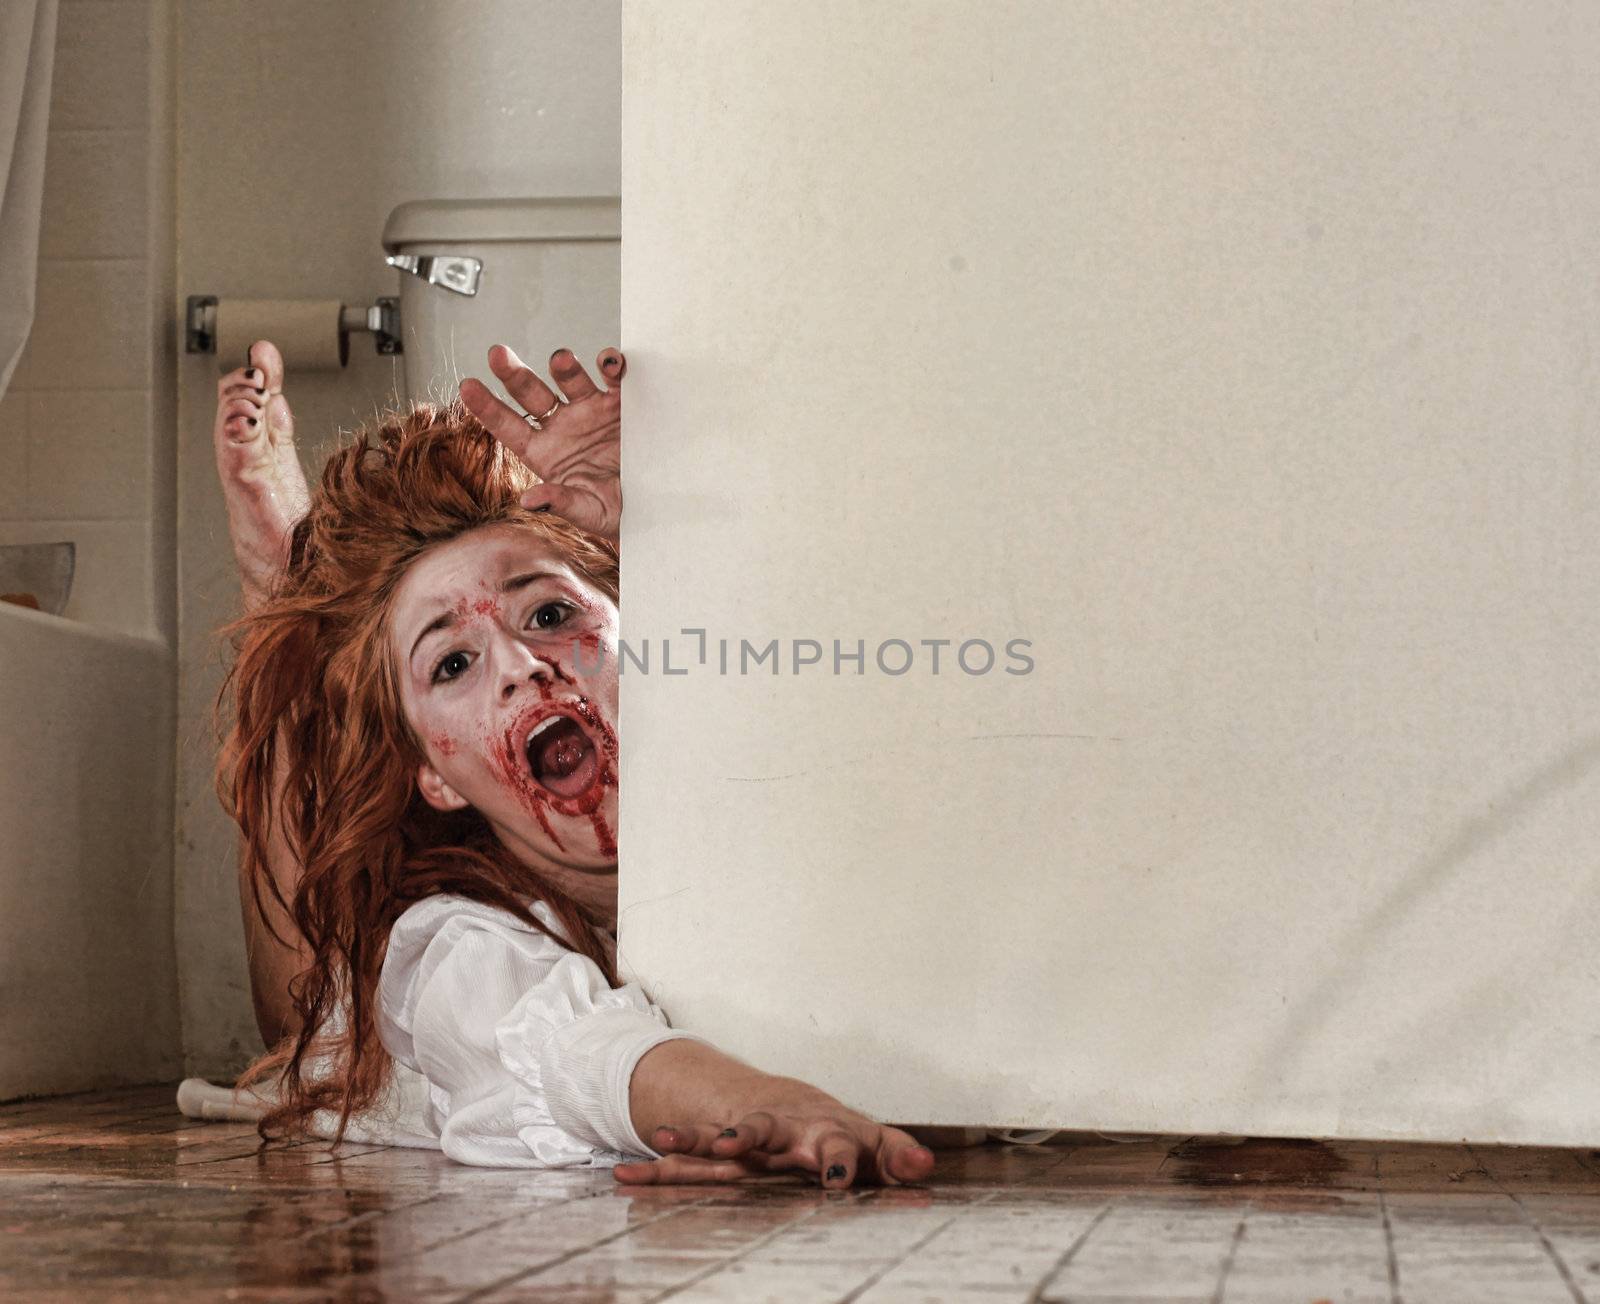 Horror Themed Image With Bleeding Freightened Woman by tobkatrina